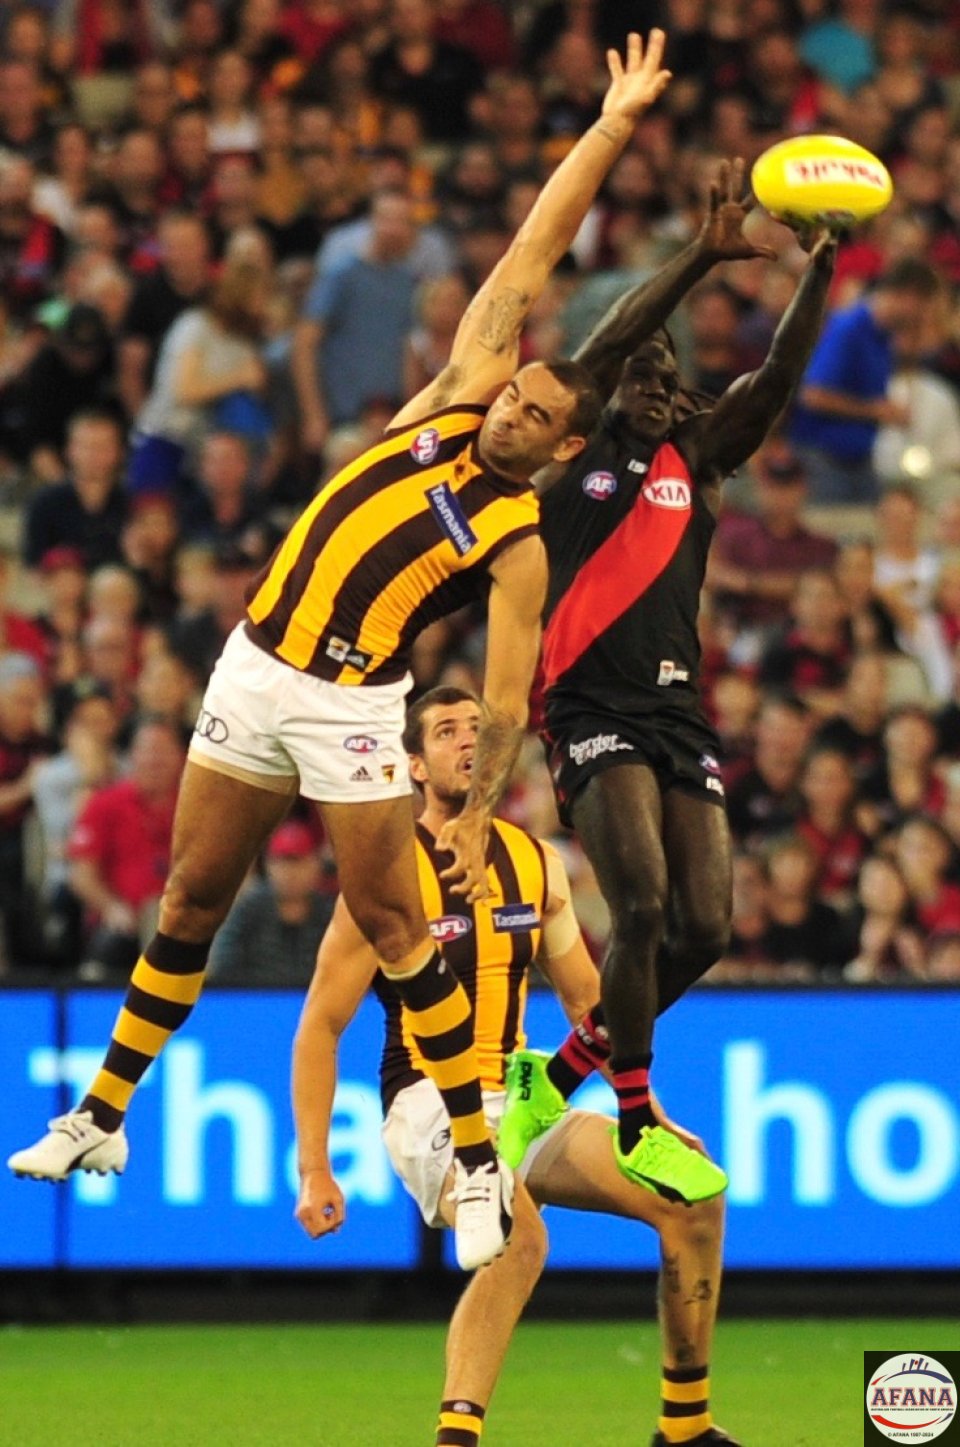 Tippingwuti brings the ball to ground in a contest with Shaun Burgoyne